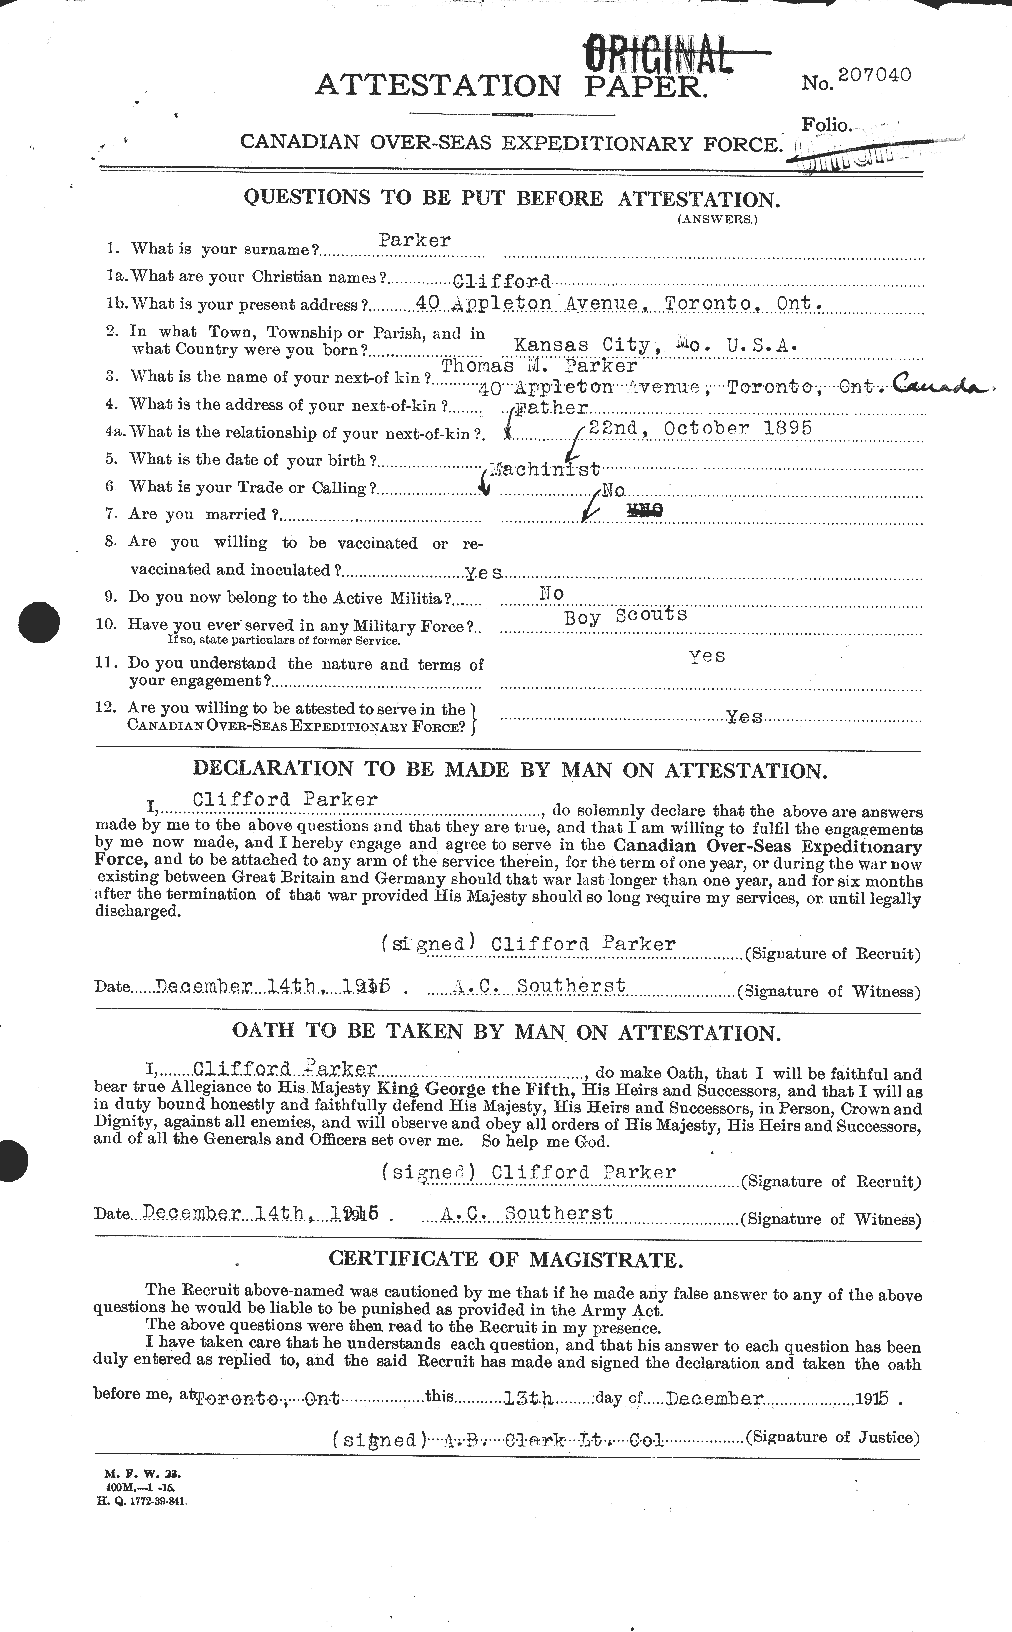 Personnel Records of the First World War - CEF 565091a